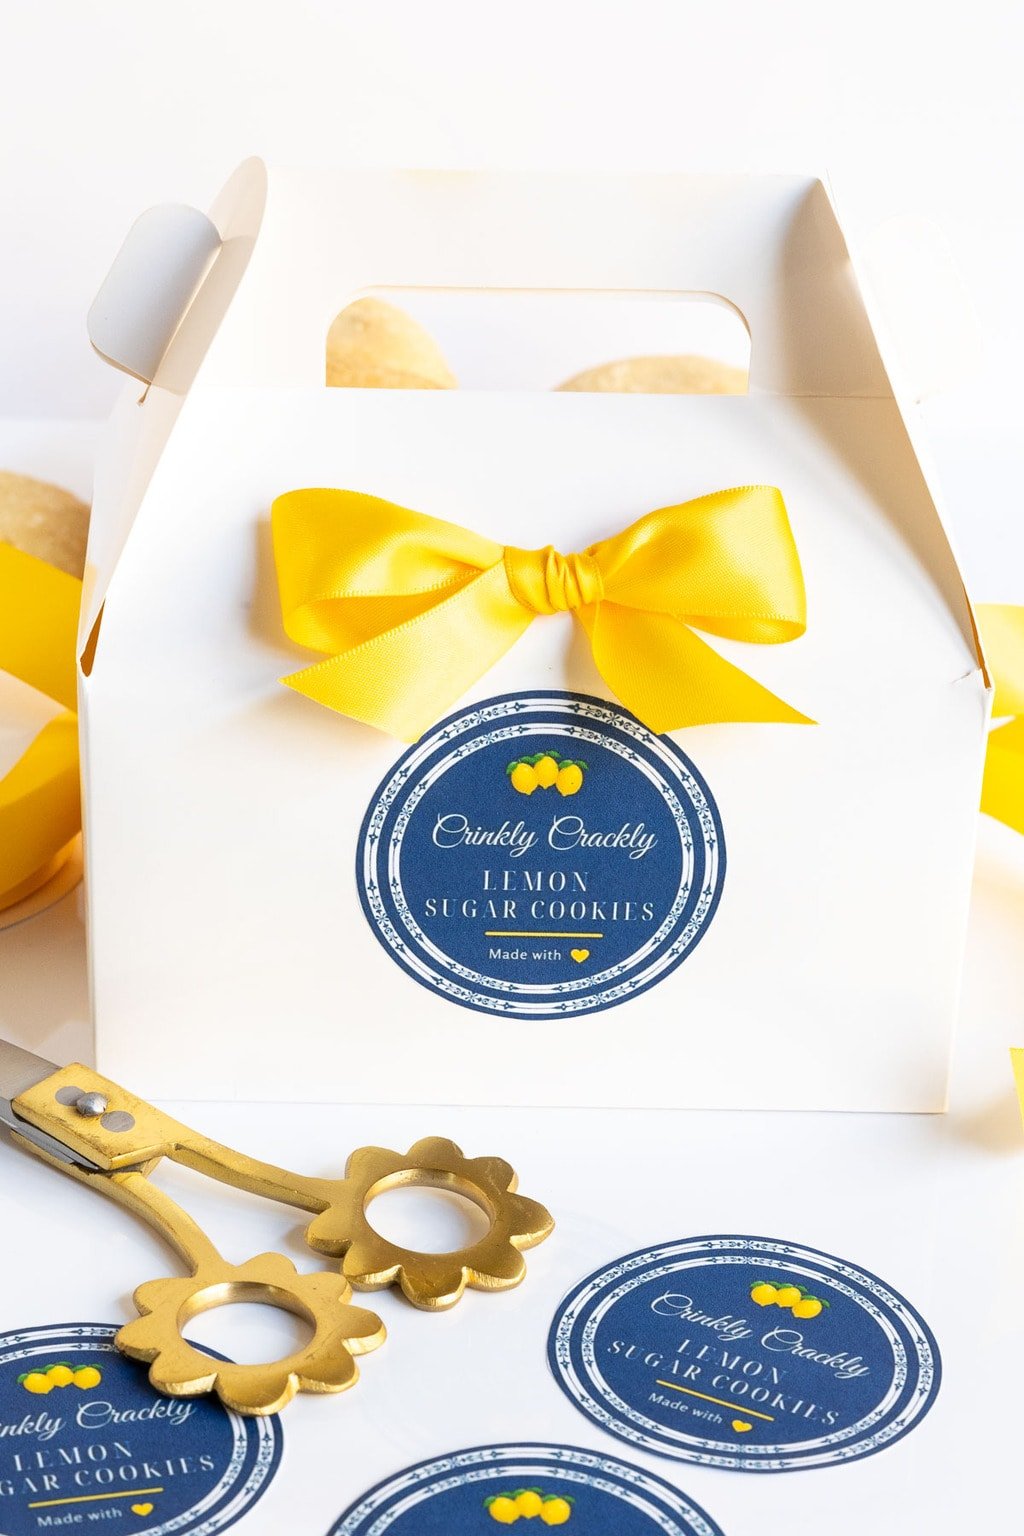 Vertical photo of custom Crinkly Crackly Lemon Sugar Cookie labels and a decorative box for gift giving